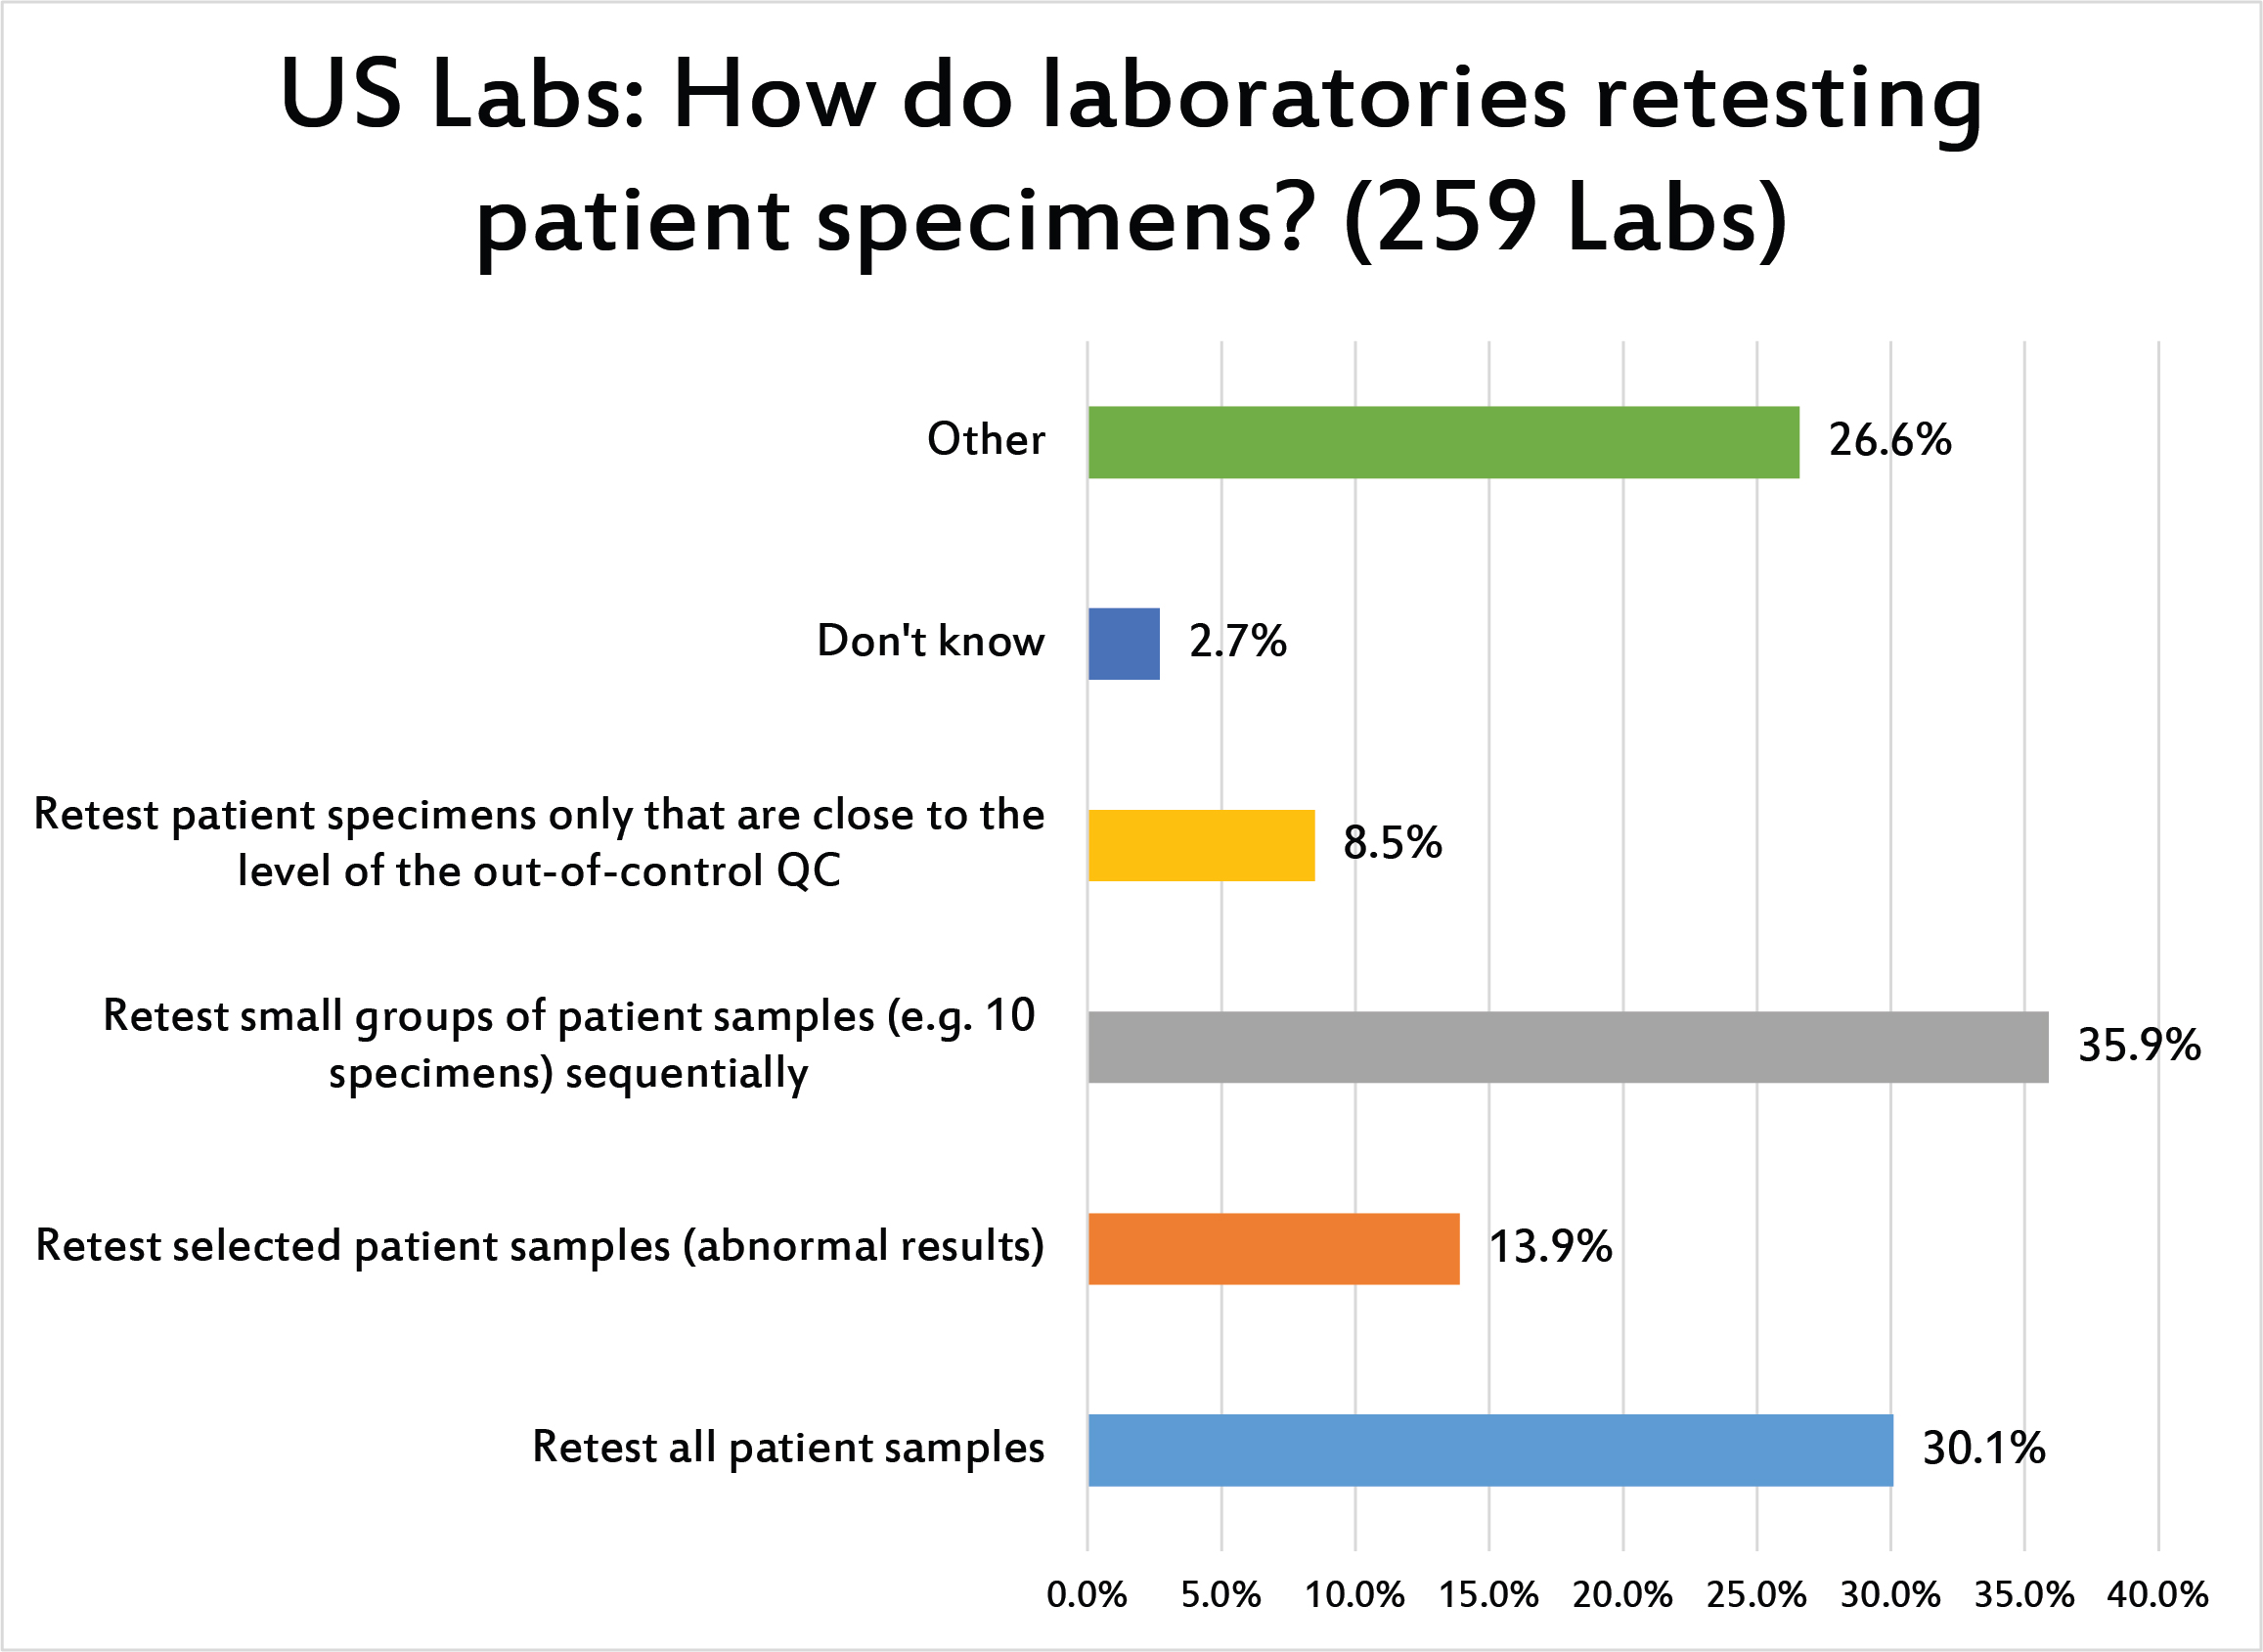 2017 Global QC Survey when out of control how do US labs retest patient samples